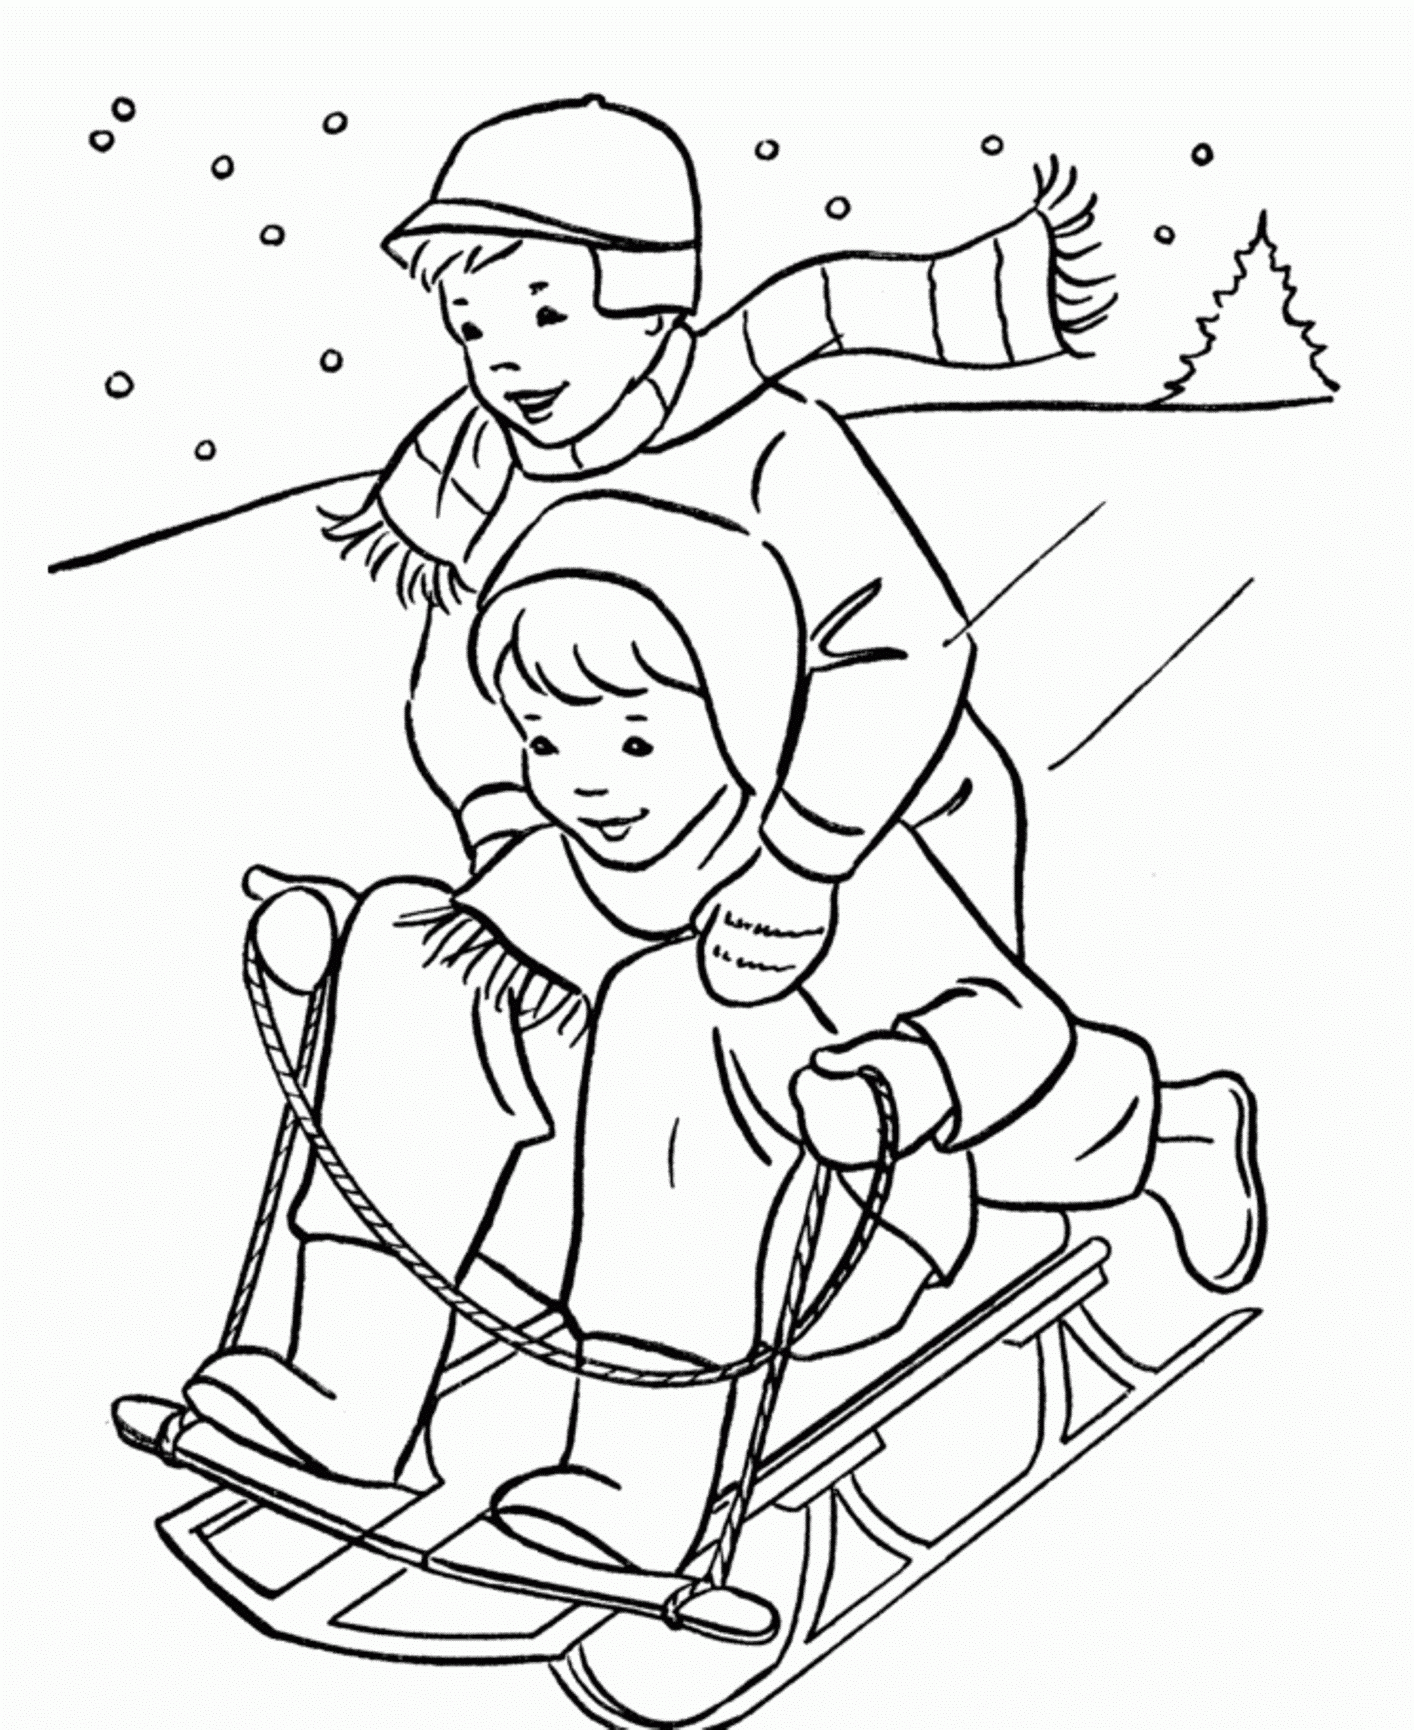 Printable Winter Coloring Pages | Coloring Me